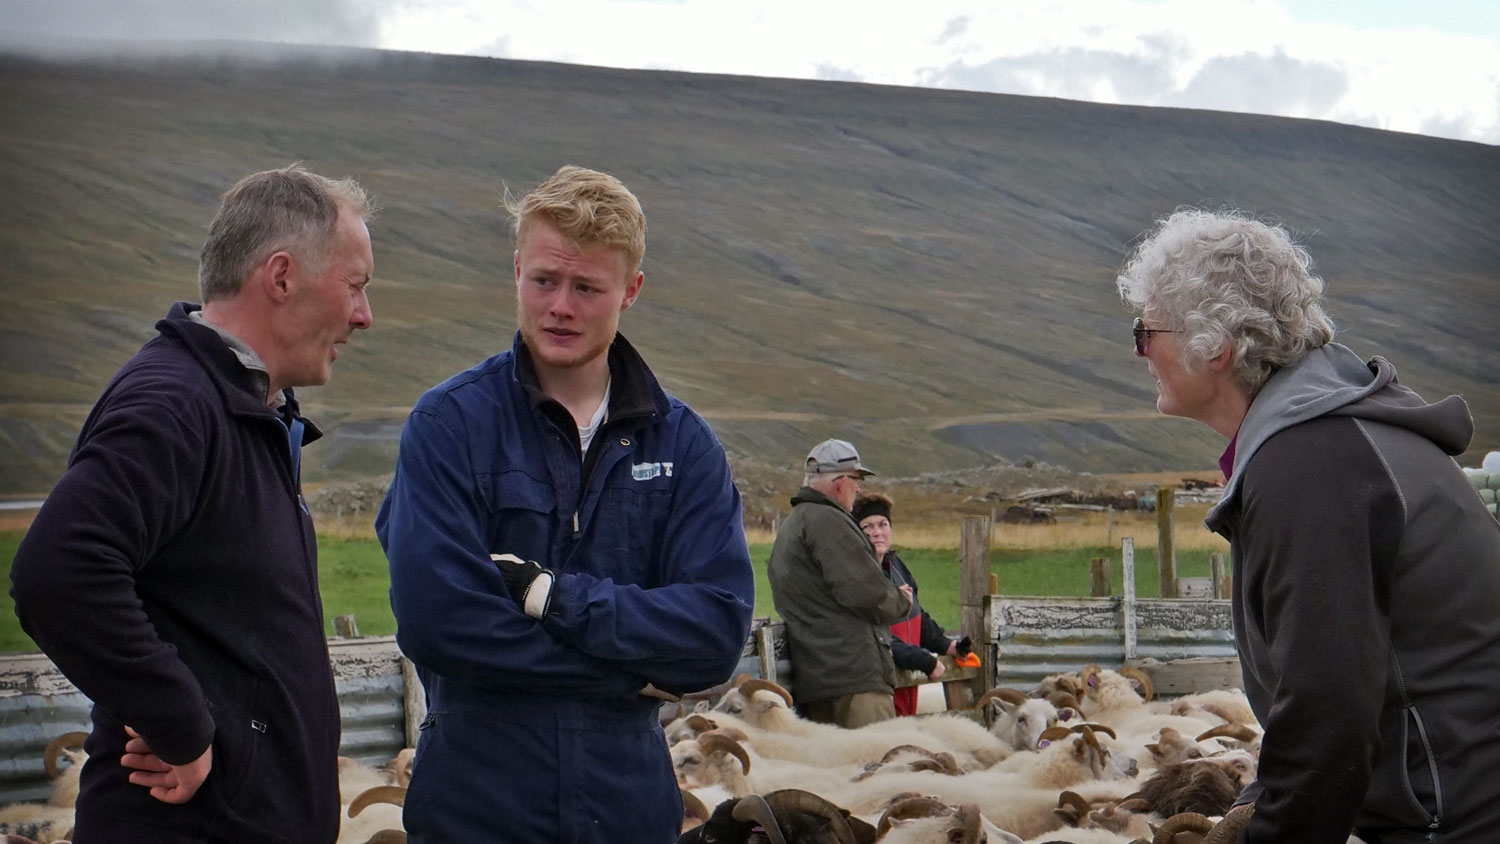 Three people talking and standing in a group of sheep.